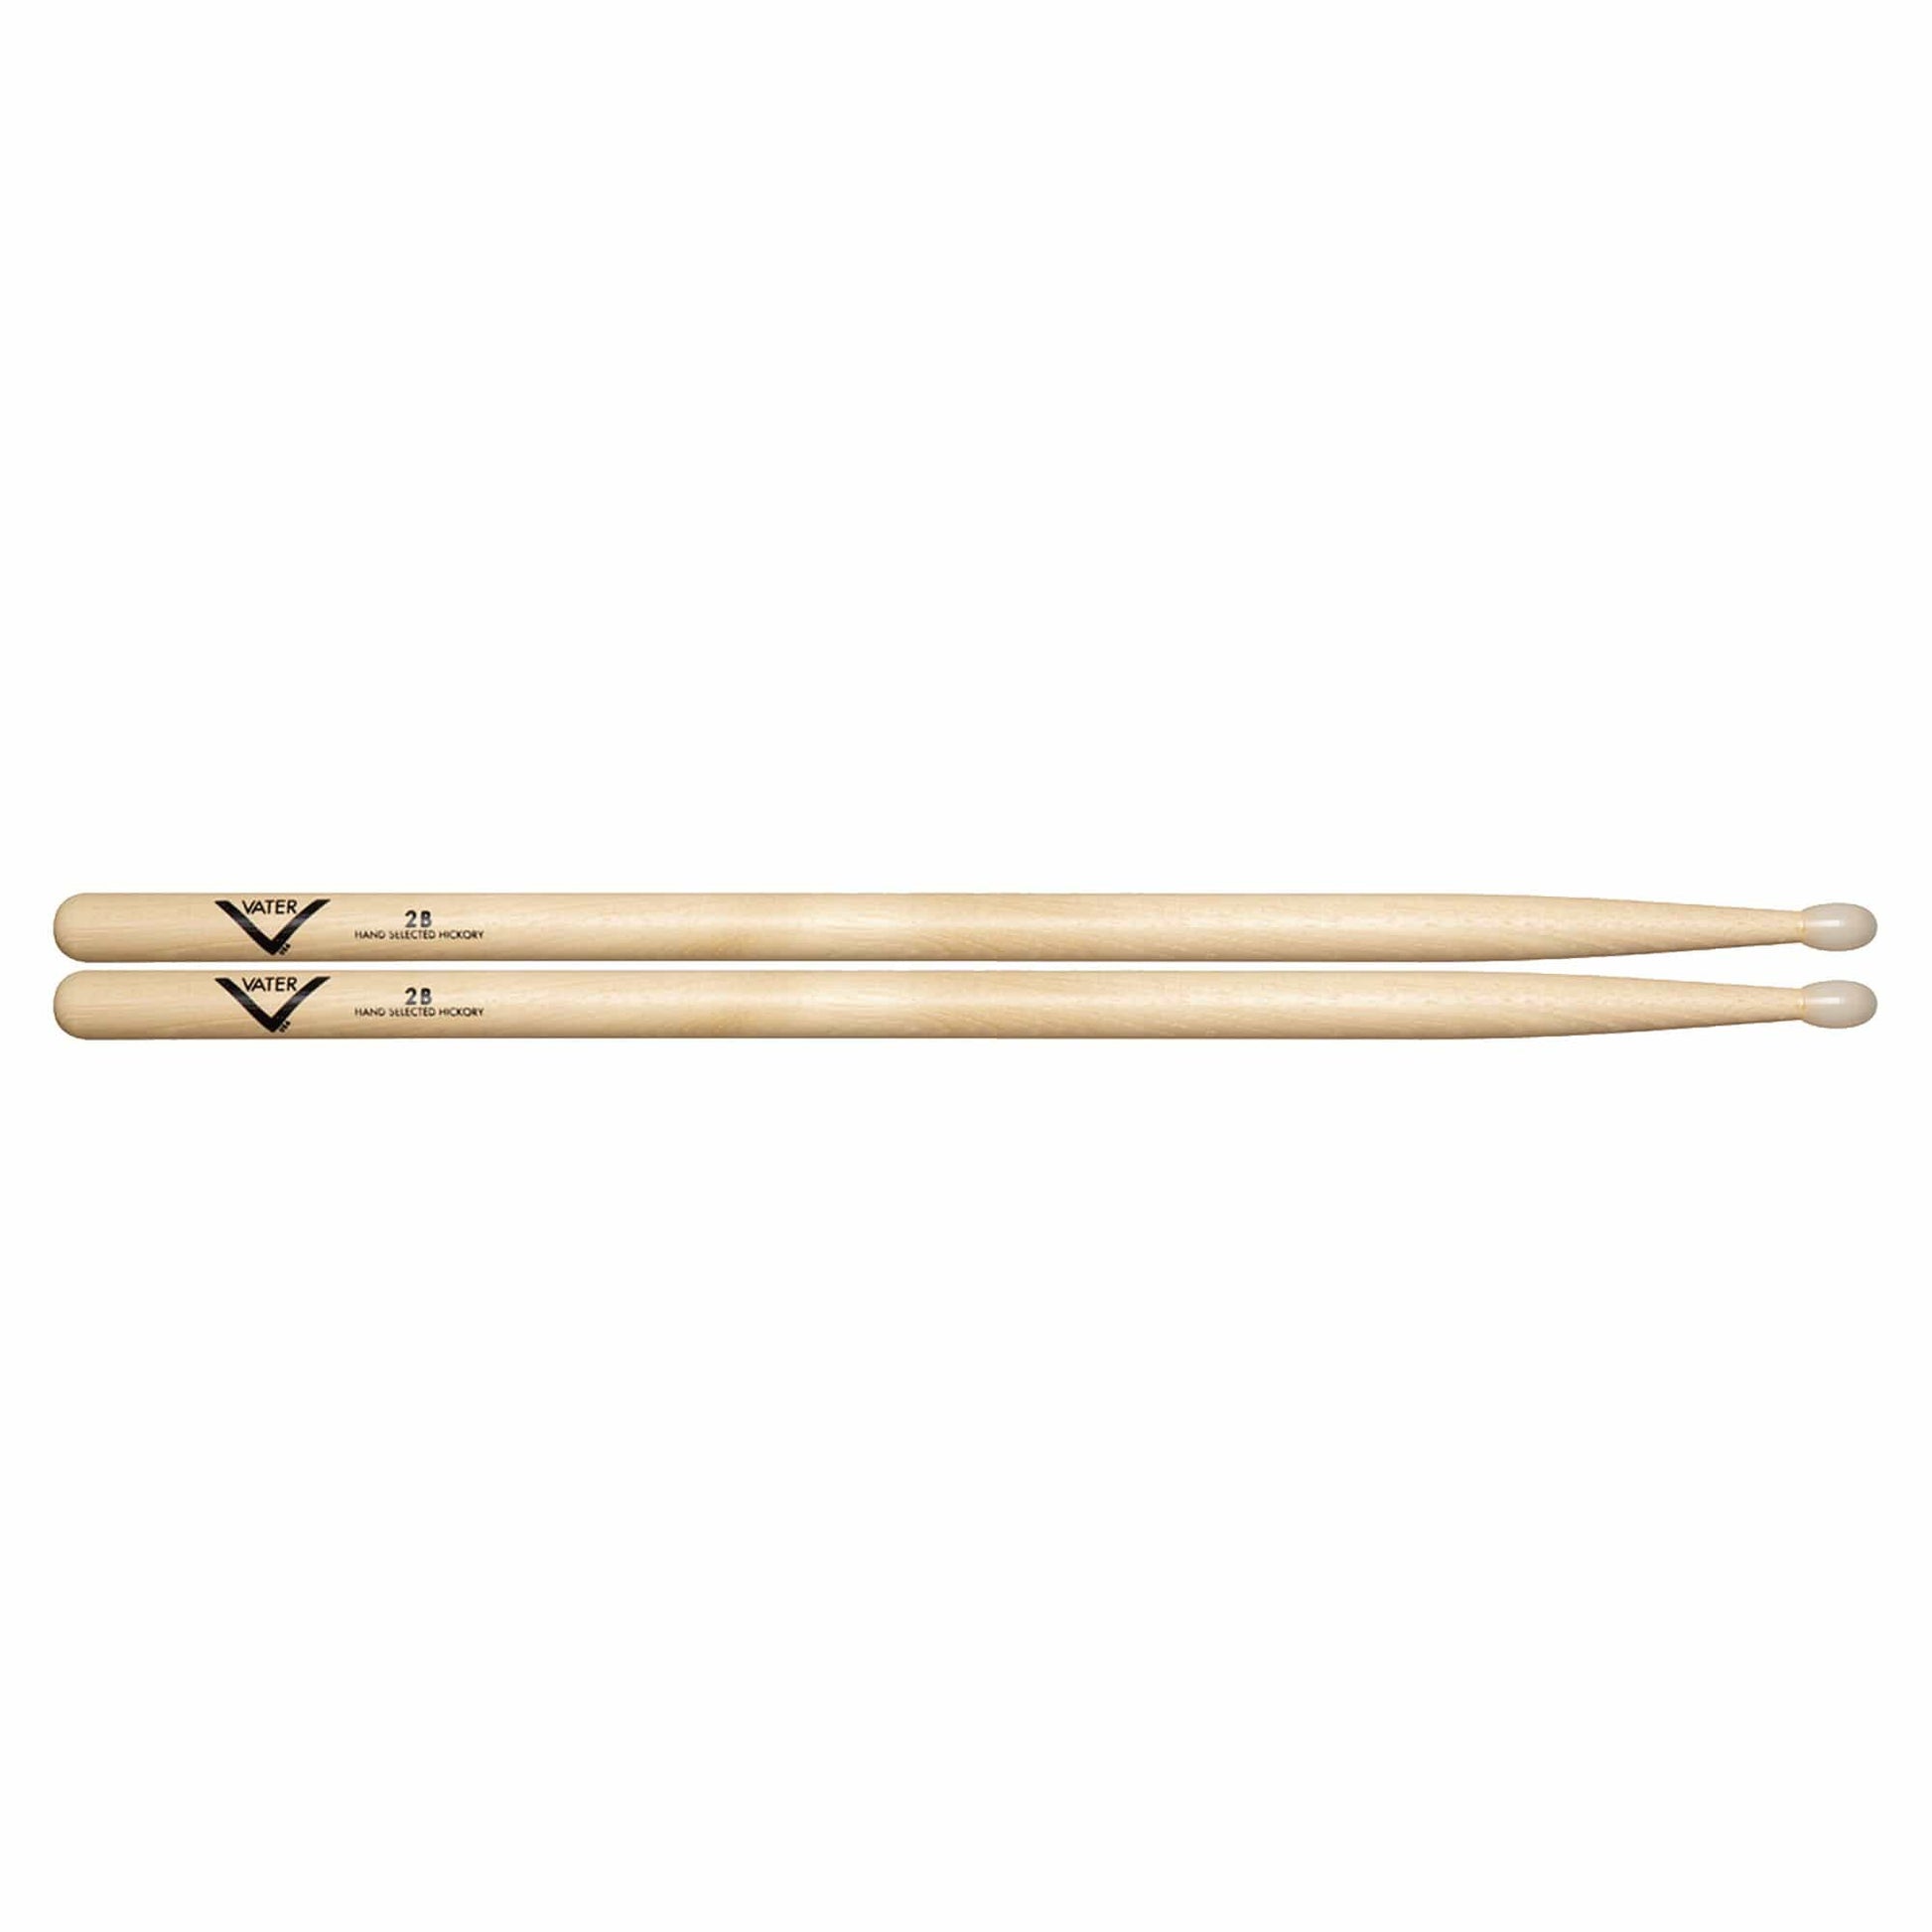 Vater Hickory 2B Nylon Tip Drum Sticks Drums and Percussion / Parts and Accessories / Drum Sticks and Mallets